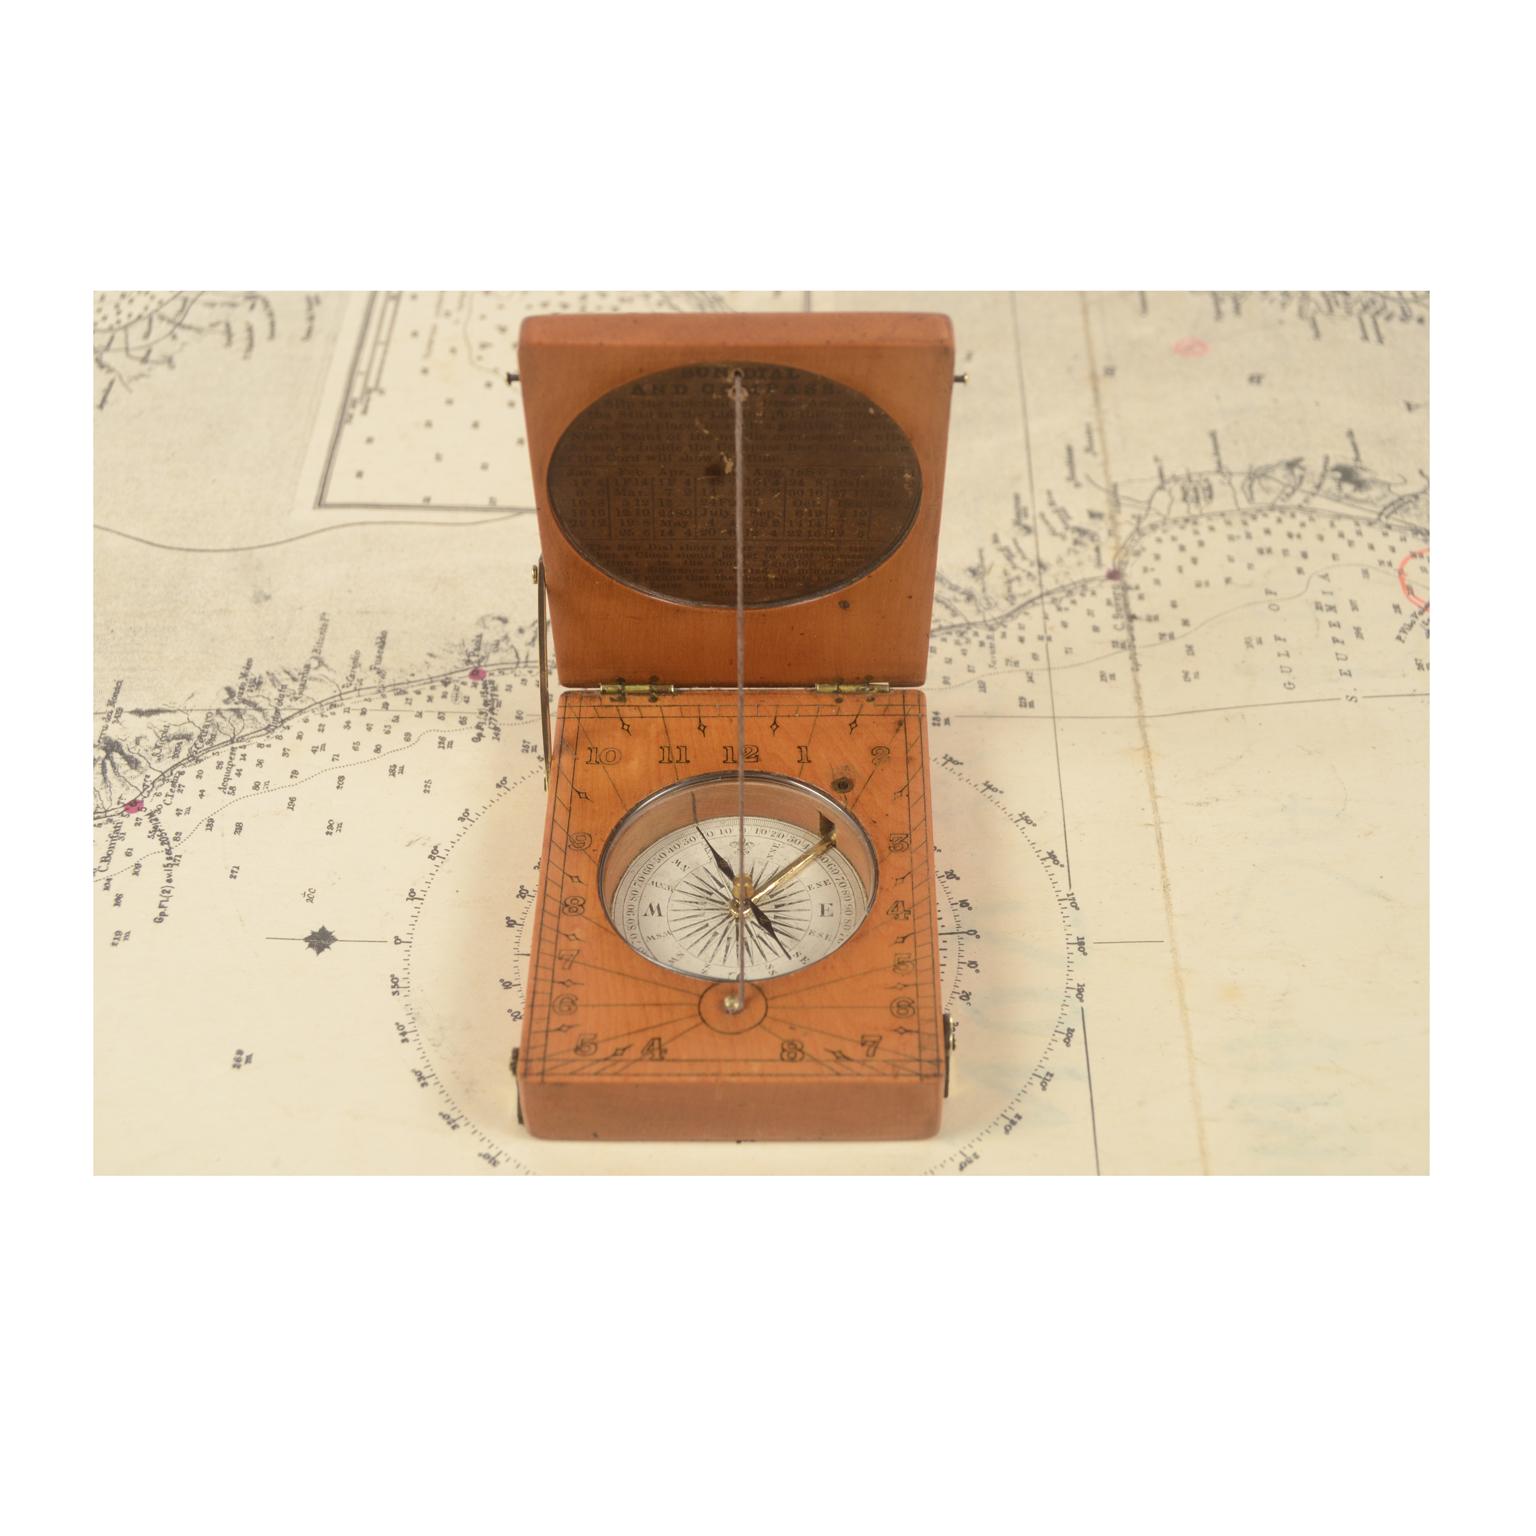 Engraved boxwood sundial with brass hinges, book-shaped, English manufacture of the second half of the 18th century. The clock is equipped with a compass for orientation inserted in the base with a needle lock and complete with a compass card on